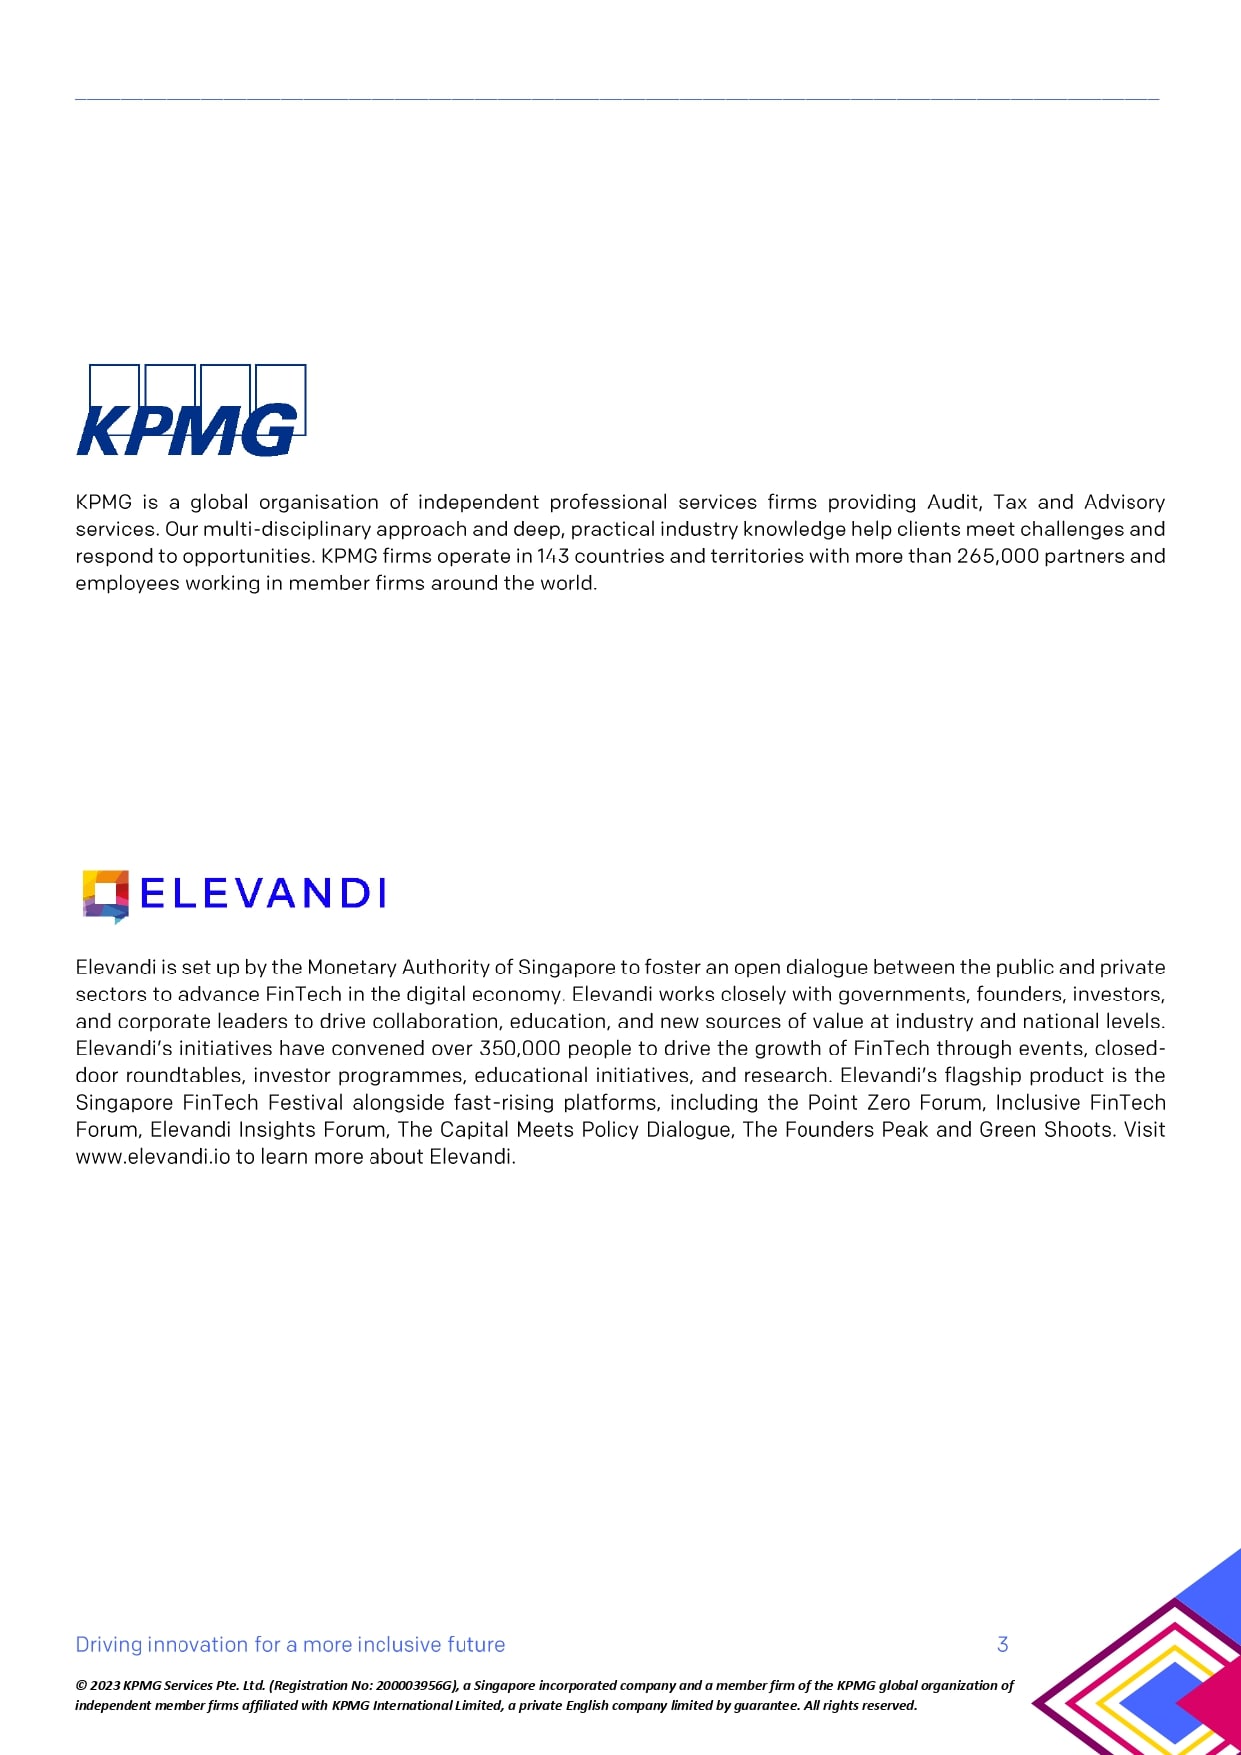 Driving_Innovation_for_a_more_inclusive_future_KPMG_3